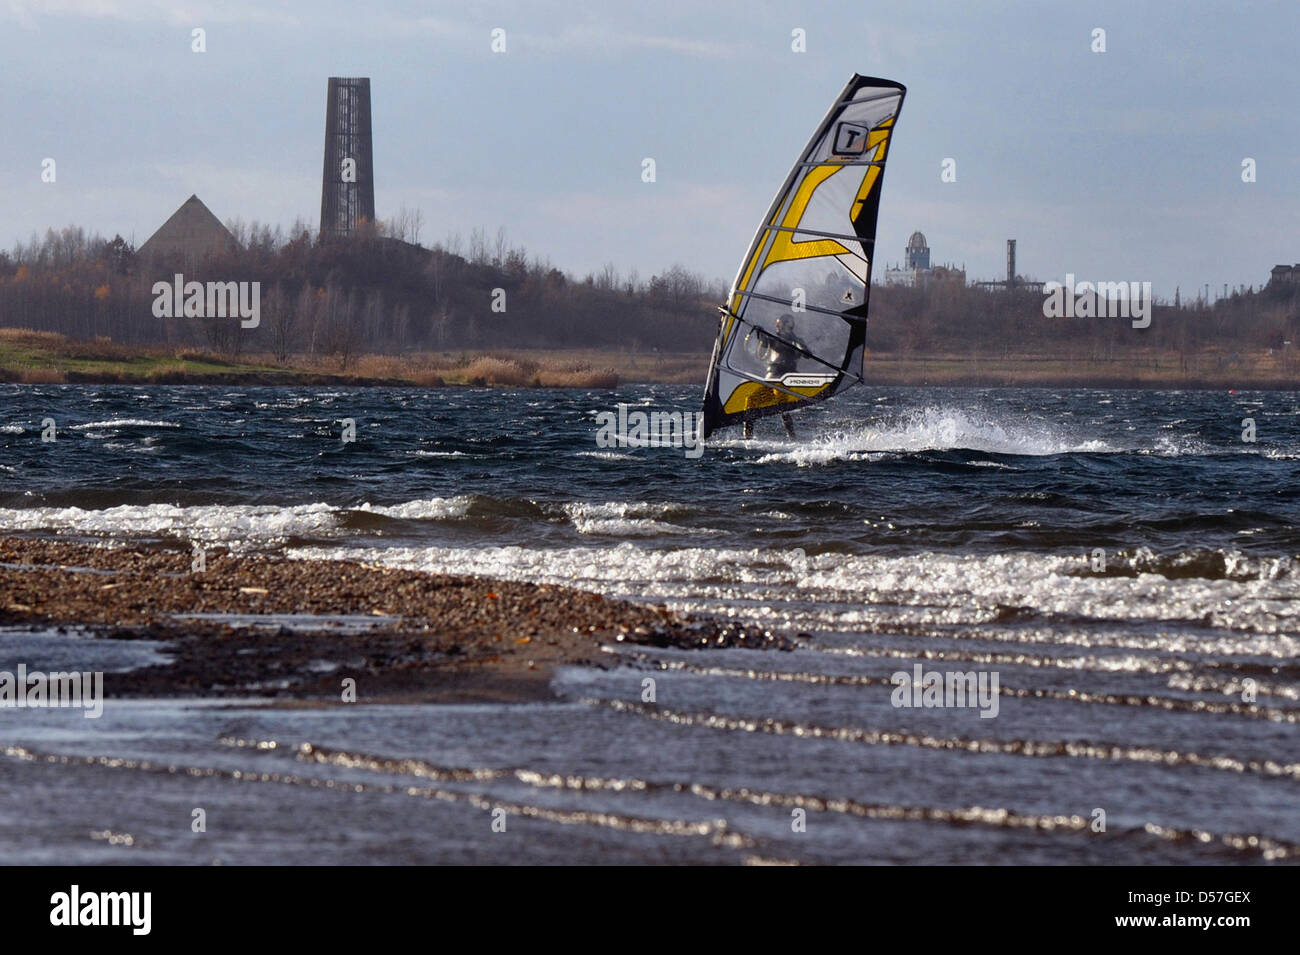 A surfer on lake 'Cospudener See' in Markkleeberg to the south of Leipzig, Germany, 27 November 2009. The lake is one of many which were formed by flooding former surface mining holes. Saxony's government is currently assessing whether to allow motor boats on the lake or not, an adminstrative procedure dubbed 'Erklaerung der Schiffbarkeit'. Environmental protection organisations st Stock Photo